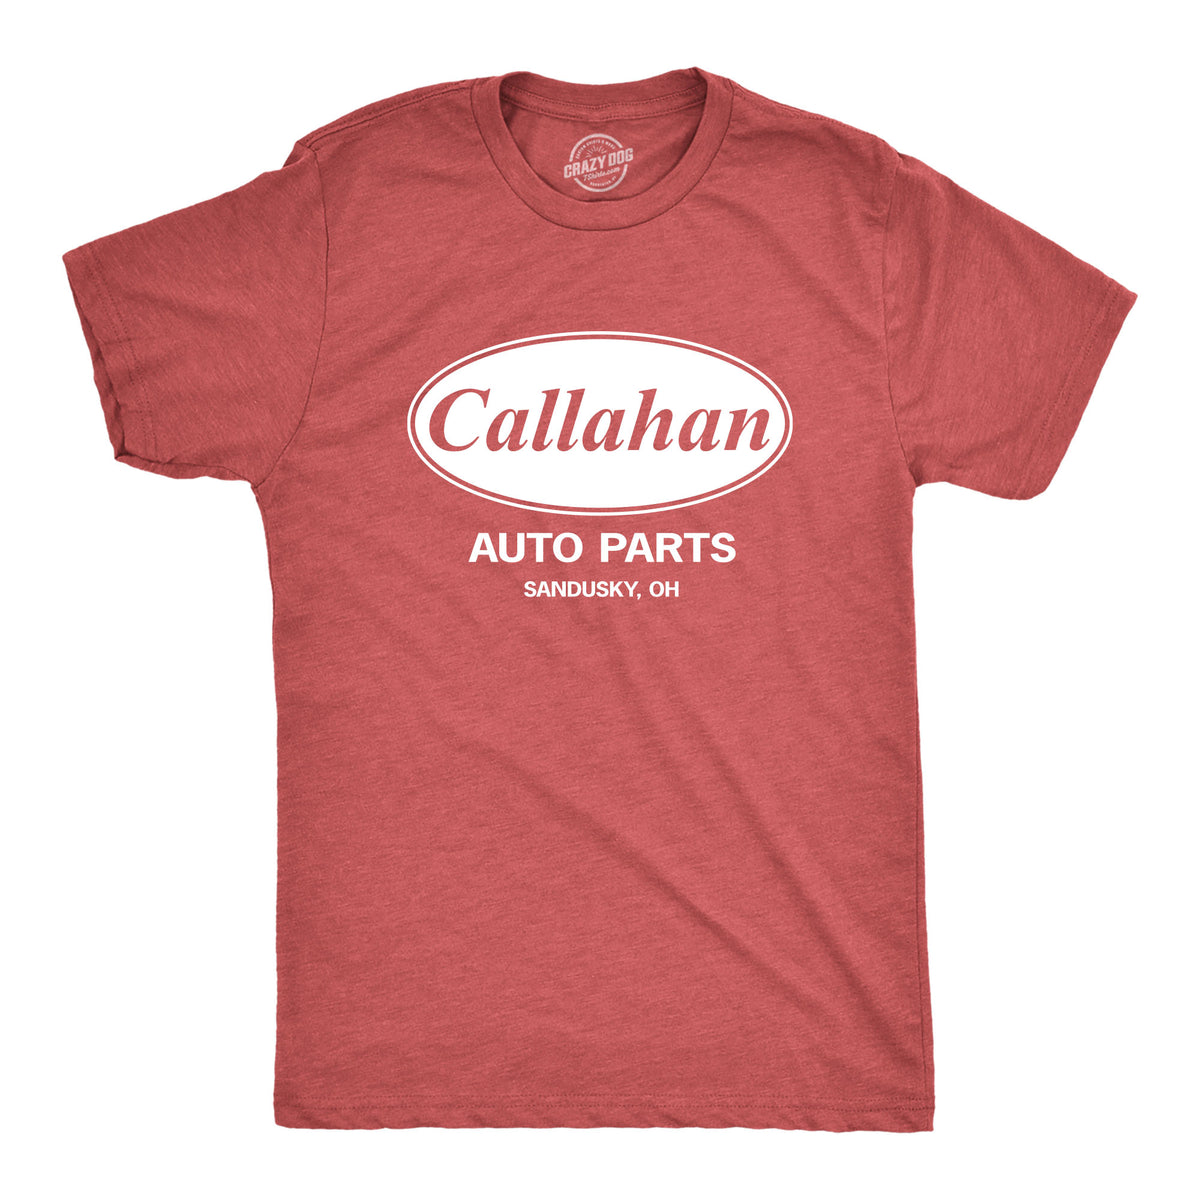 Funny Heather Red Callahan Auto Parts Mens T Shirt Nerdy TV &amp; Movies Tee